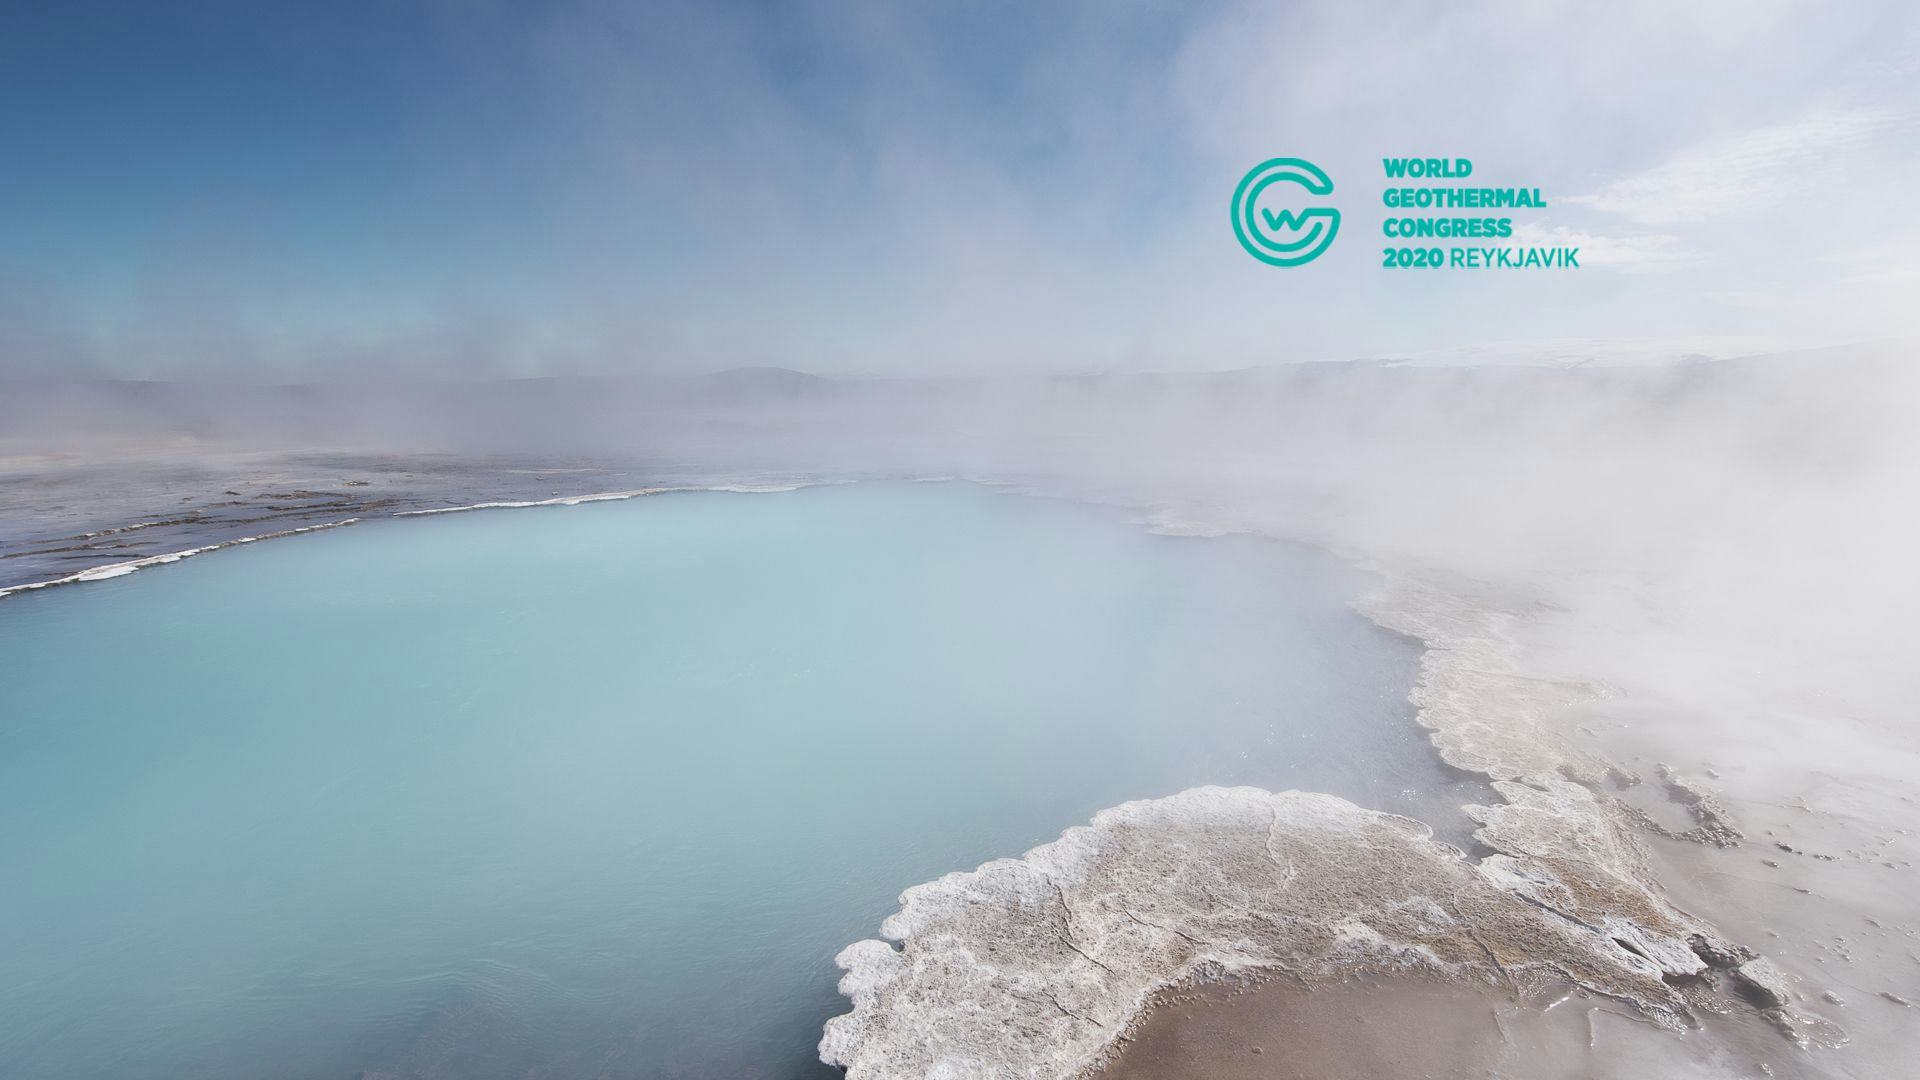 Geothermal area with steaming blue water and a text "World geothermal congress 2020 Reykjavik"